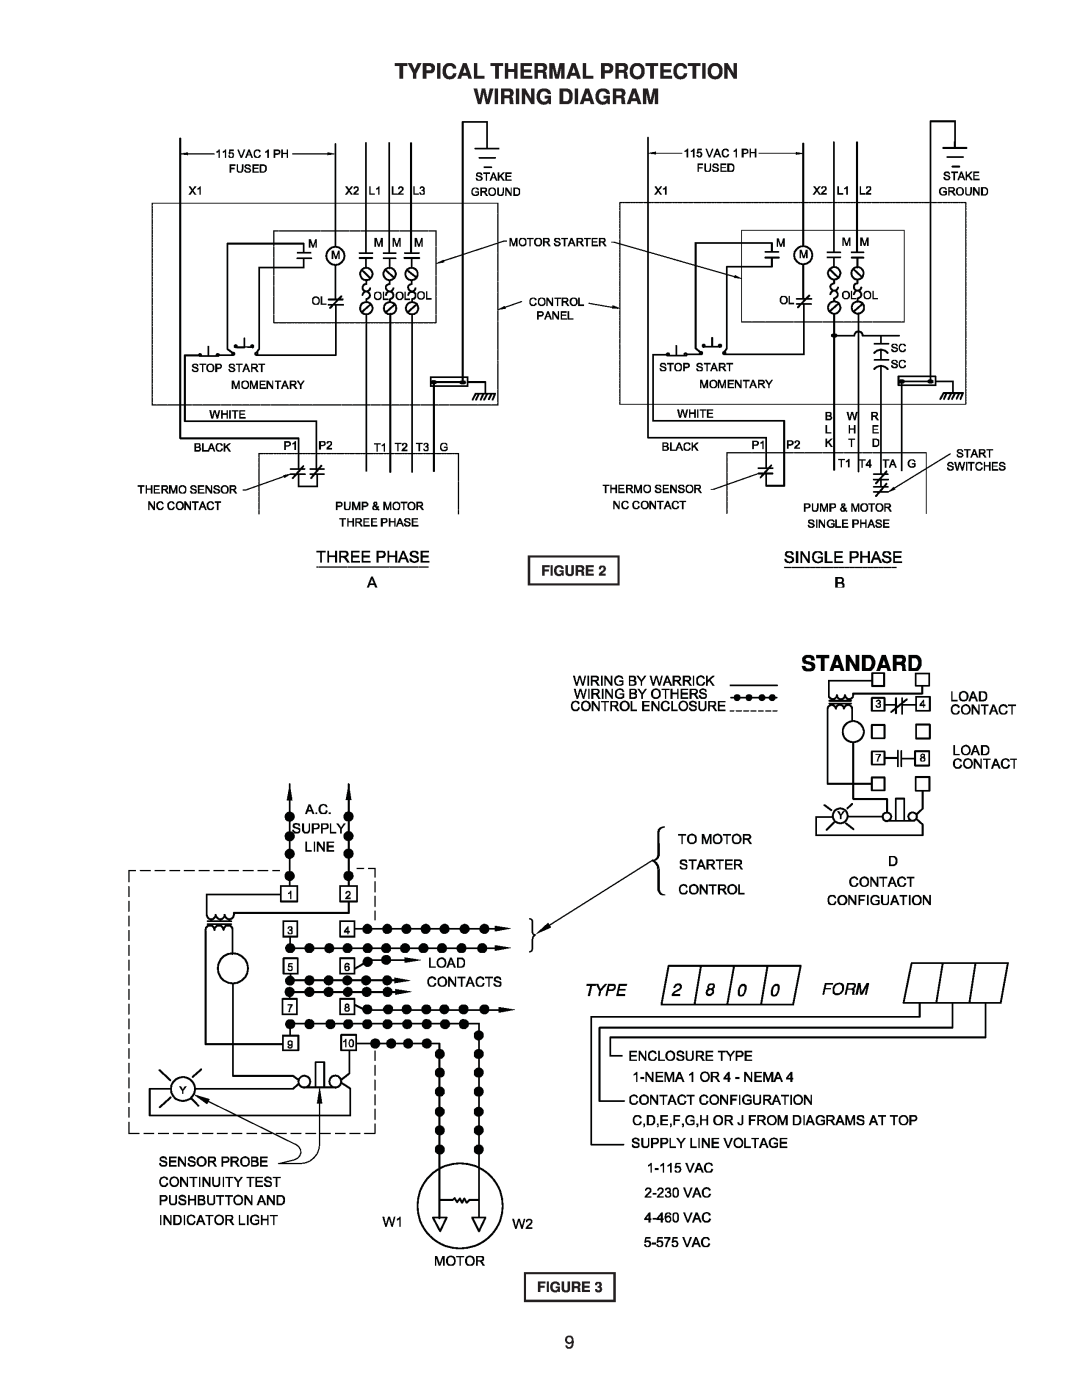 Crane Plumbing 8XSE-HA operation manual Typical Thermal Protection Wiring Diagram, Figure Figure 